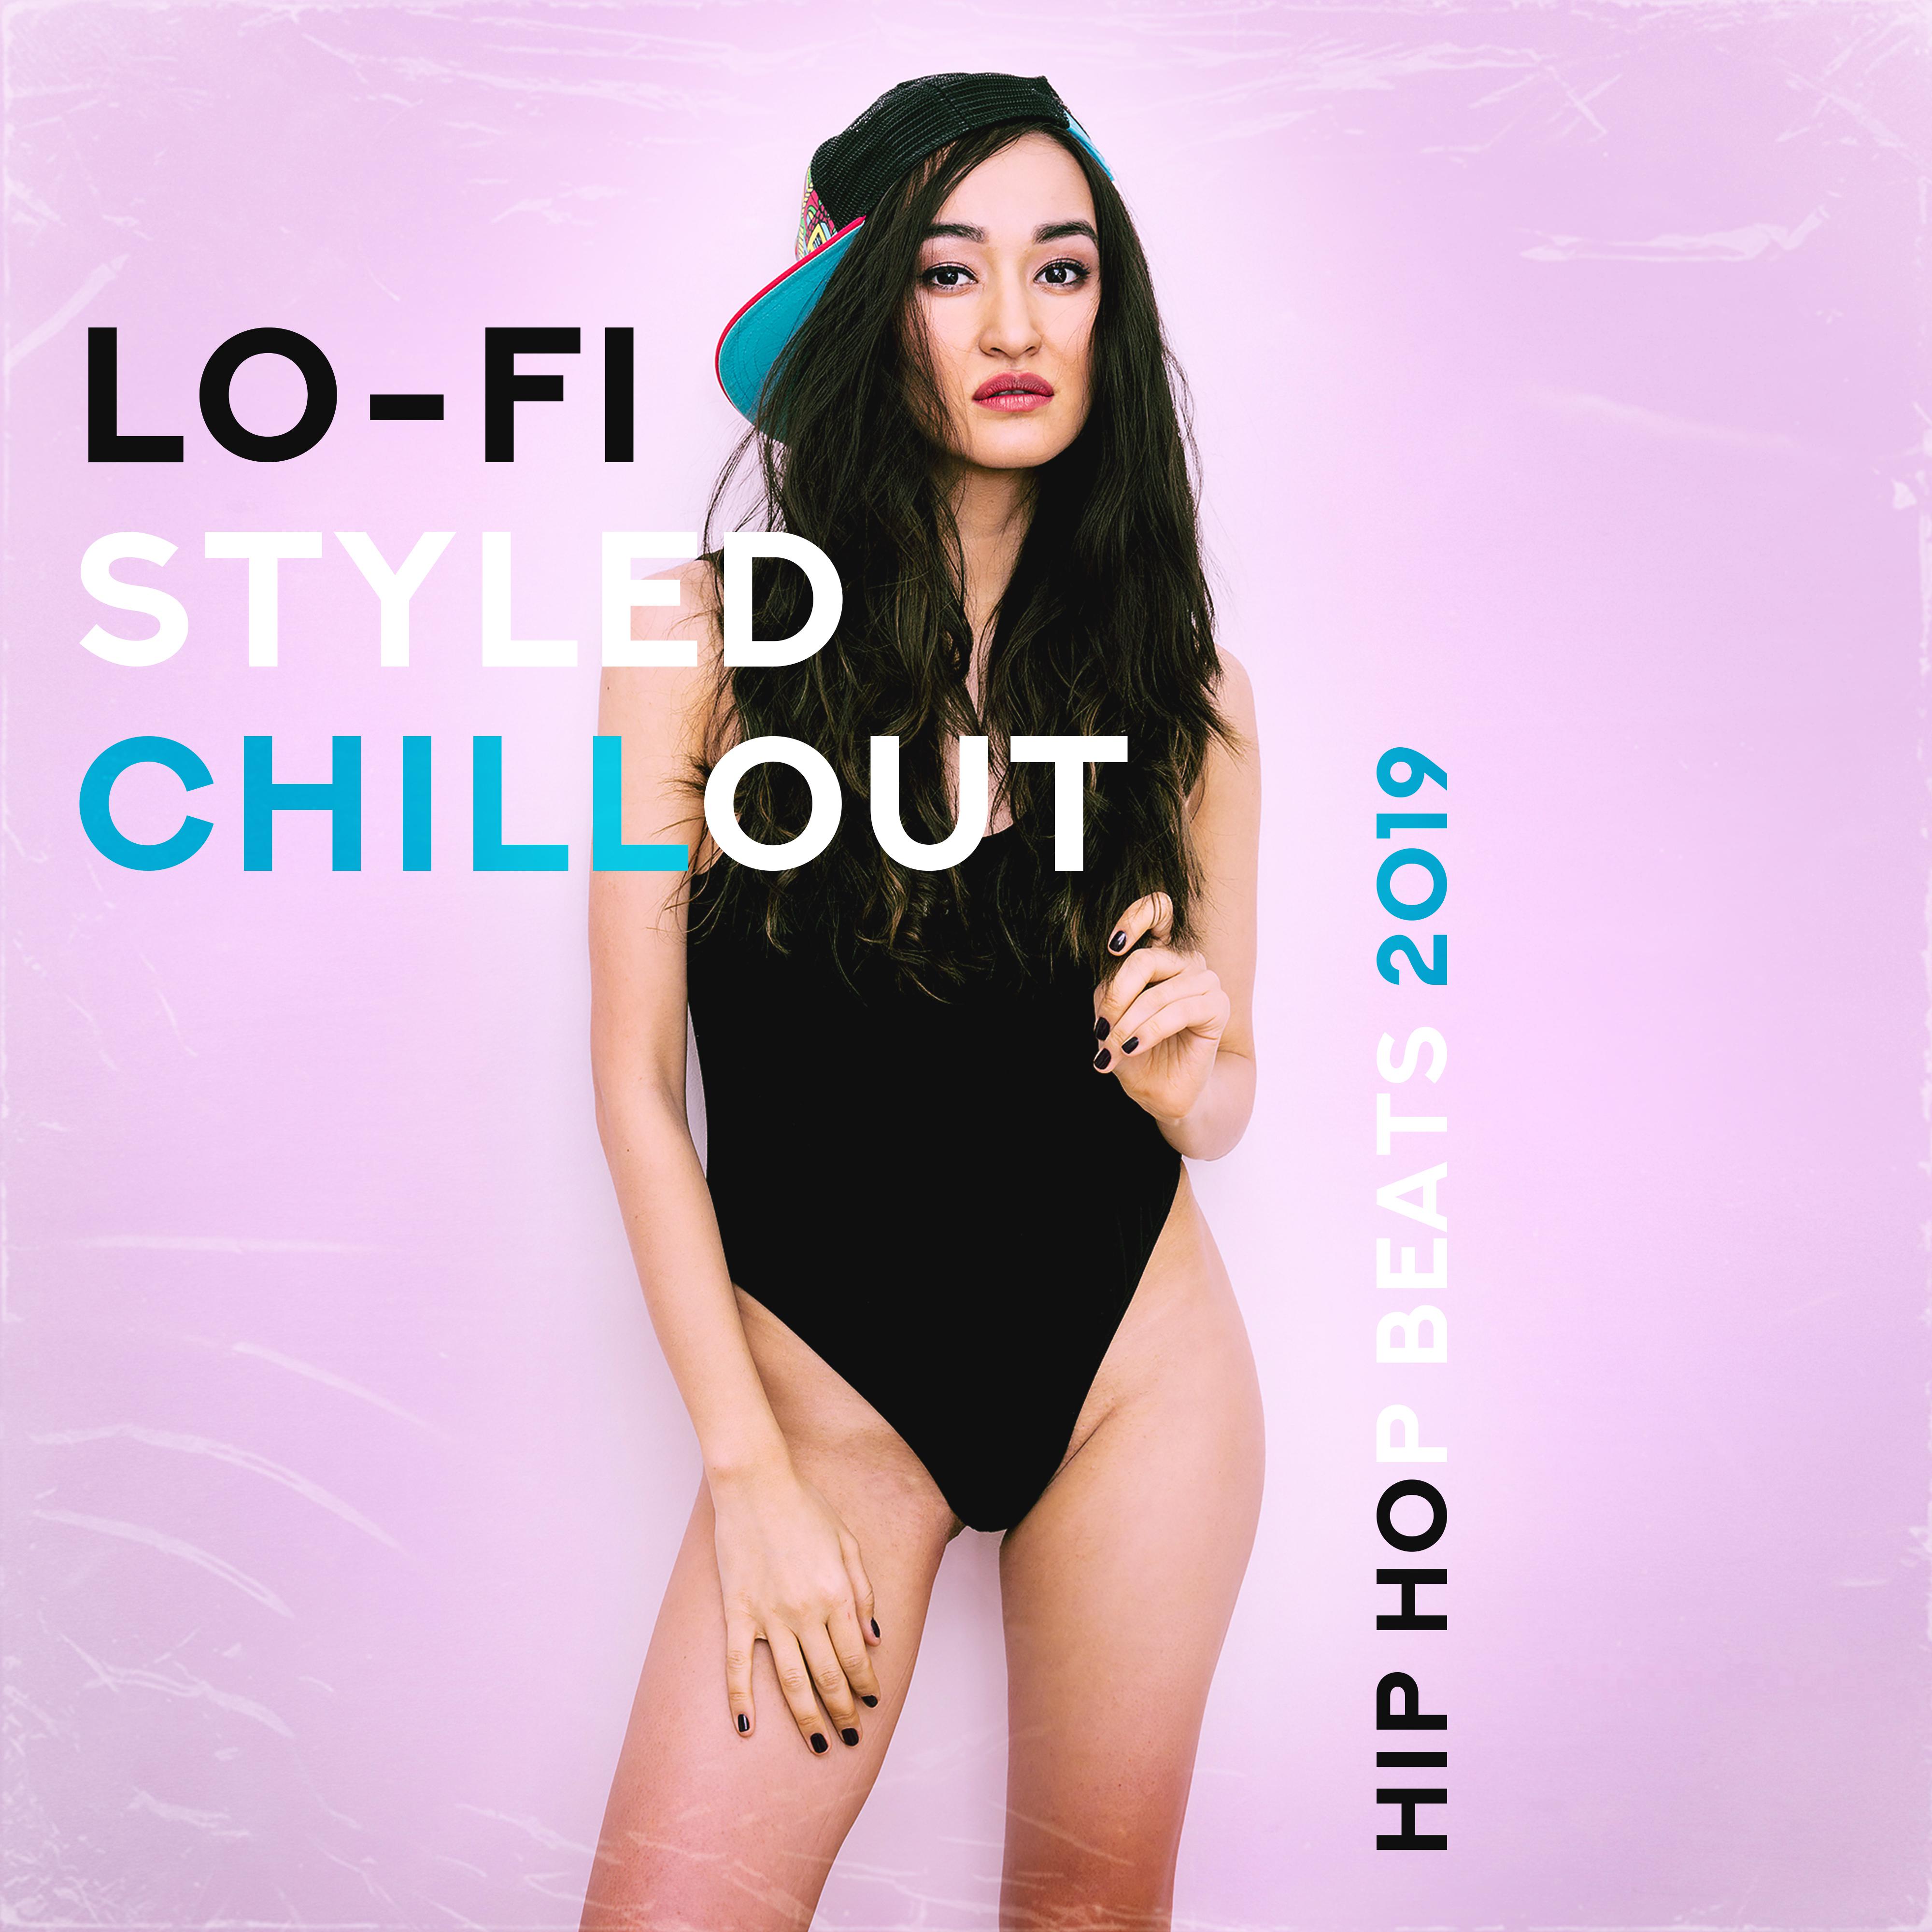 Lo-Fi Styled Chillout Hip Hop Beats 2019